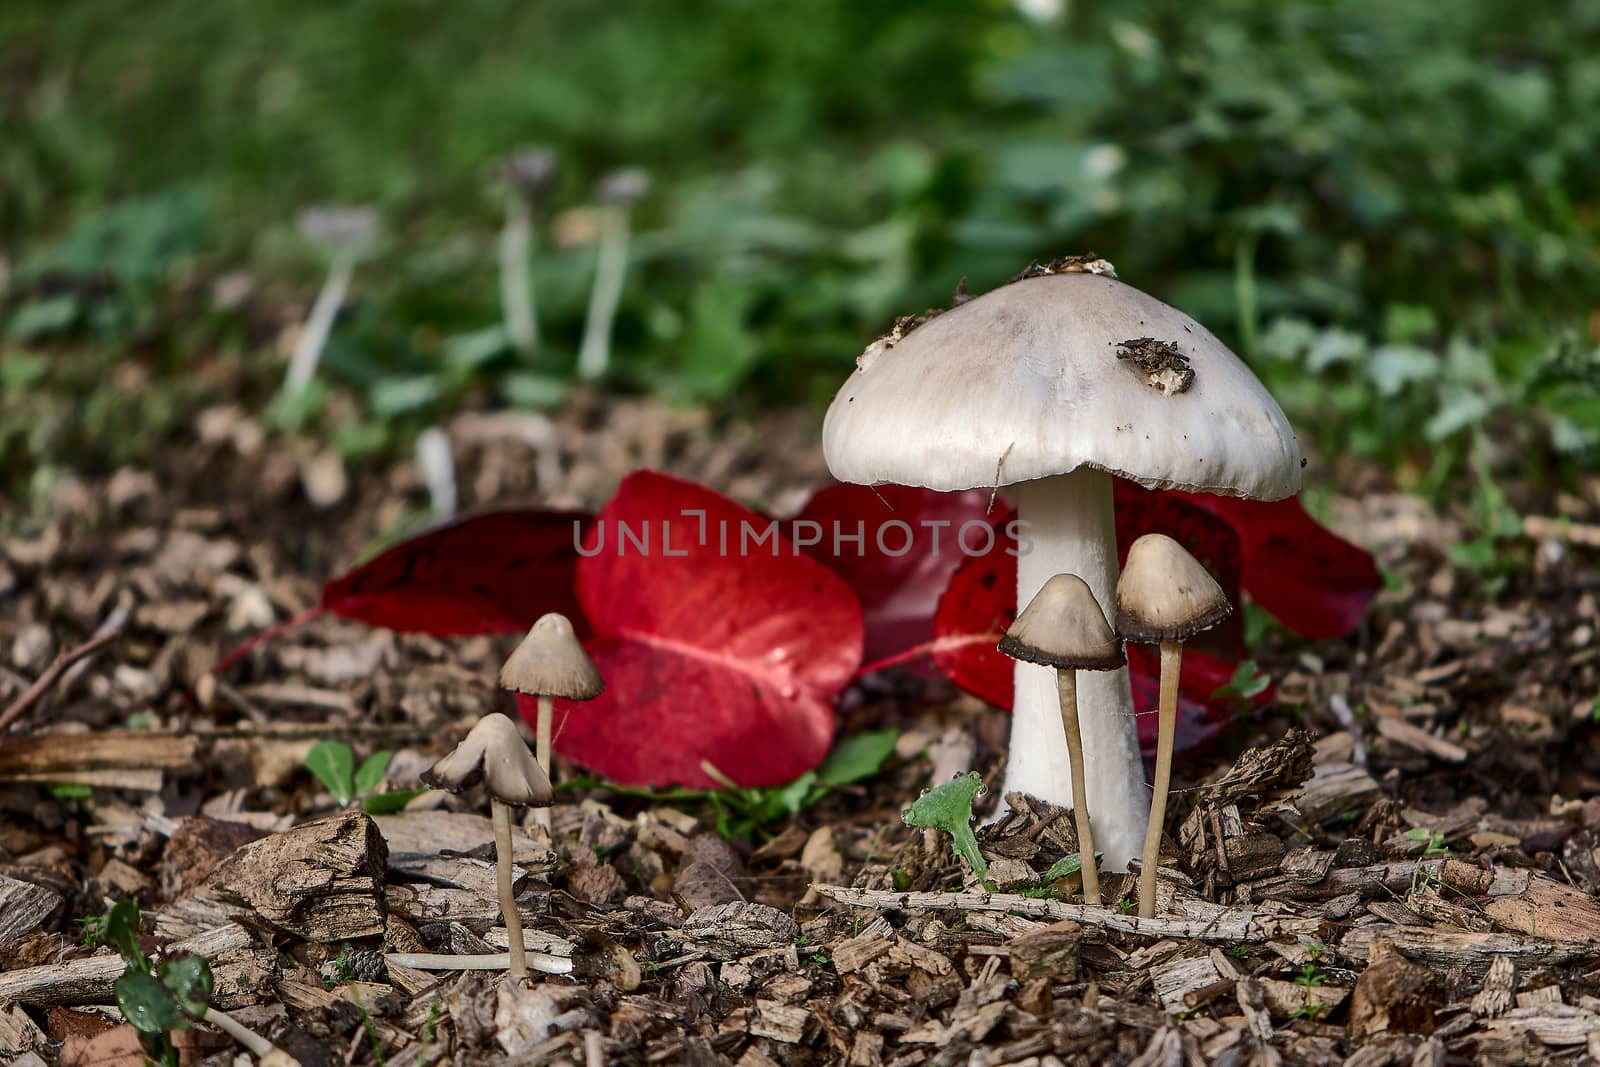 SMALL WILD MUSHROOMS IN THE FOREST by SoniaKarelitz